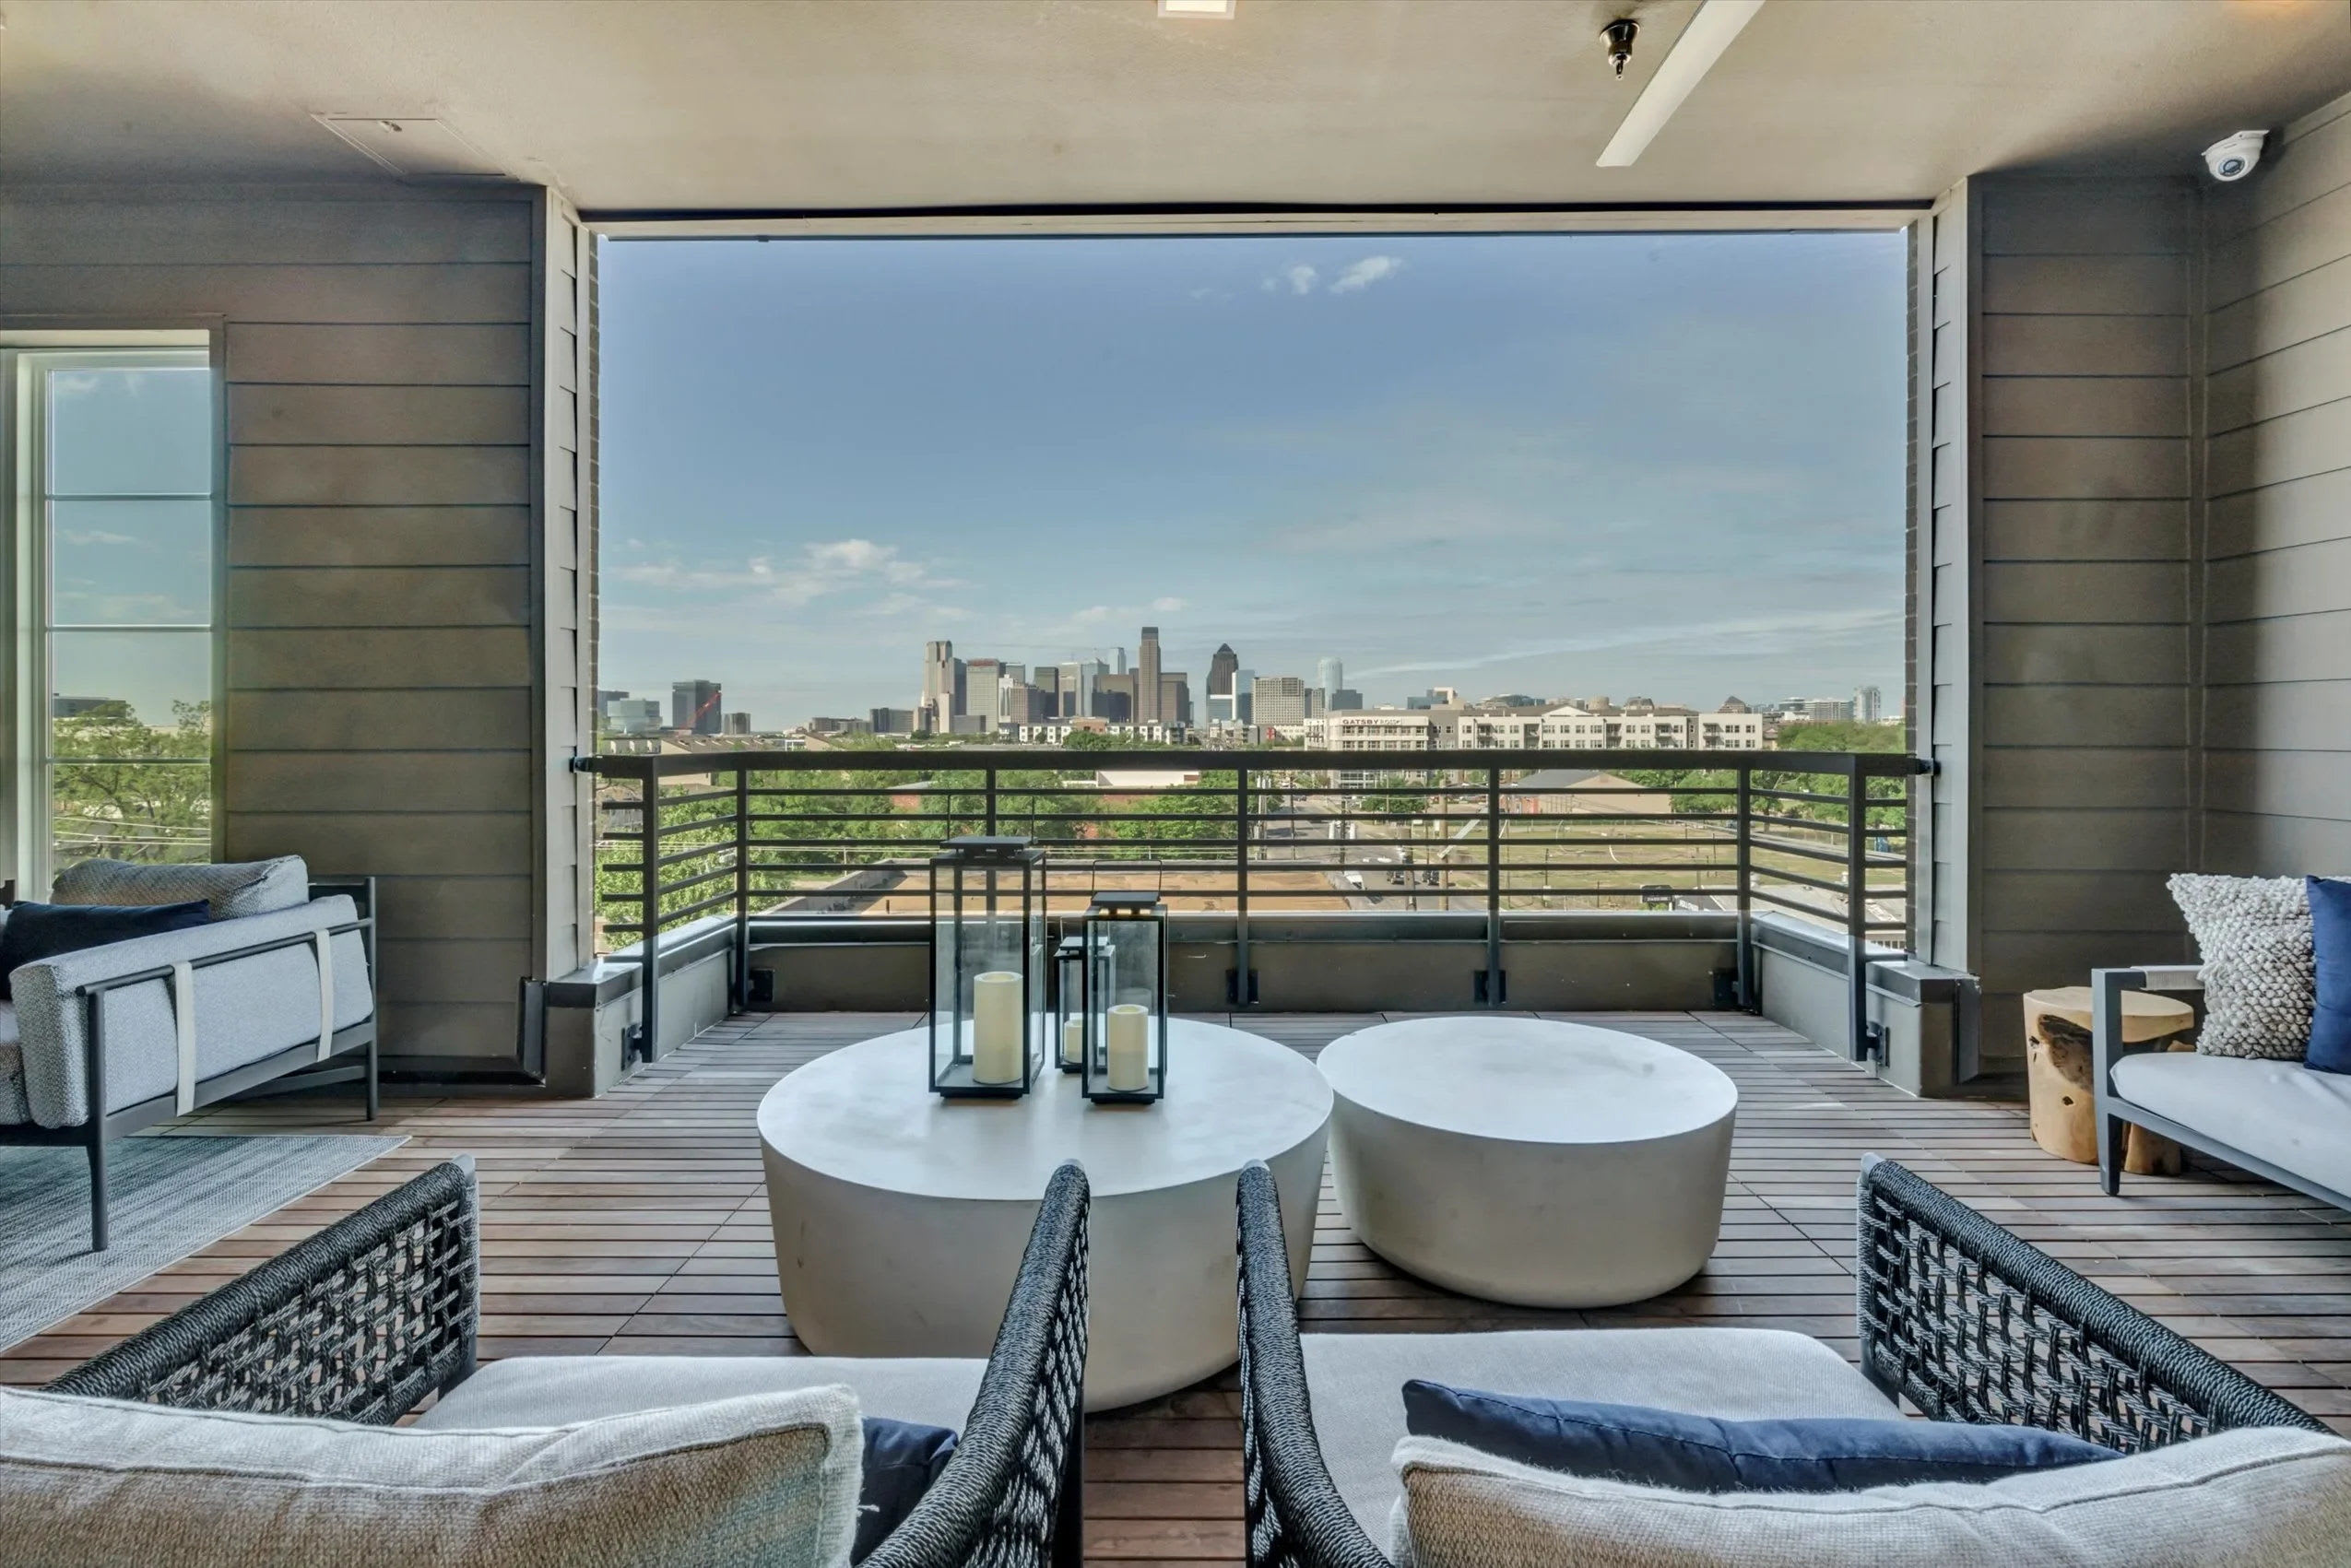 Views of the city from the rooftop lounge area at Ross + Peak in Dallas, Texas